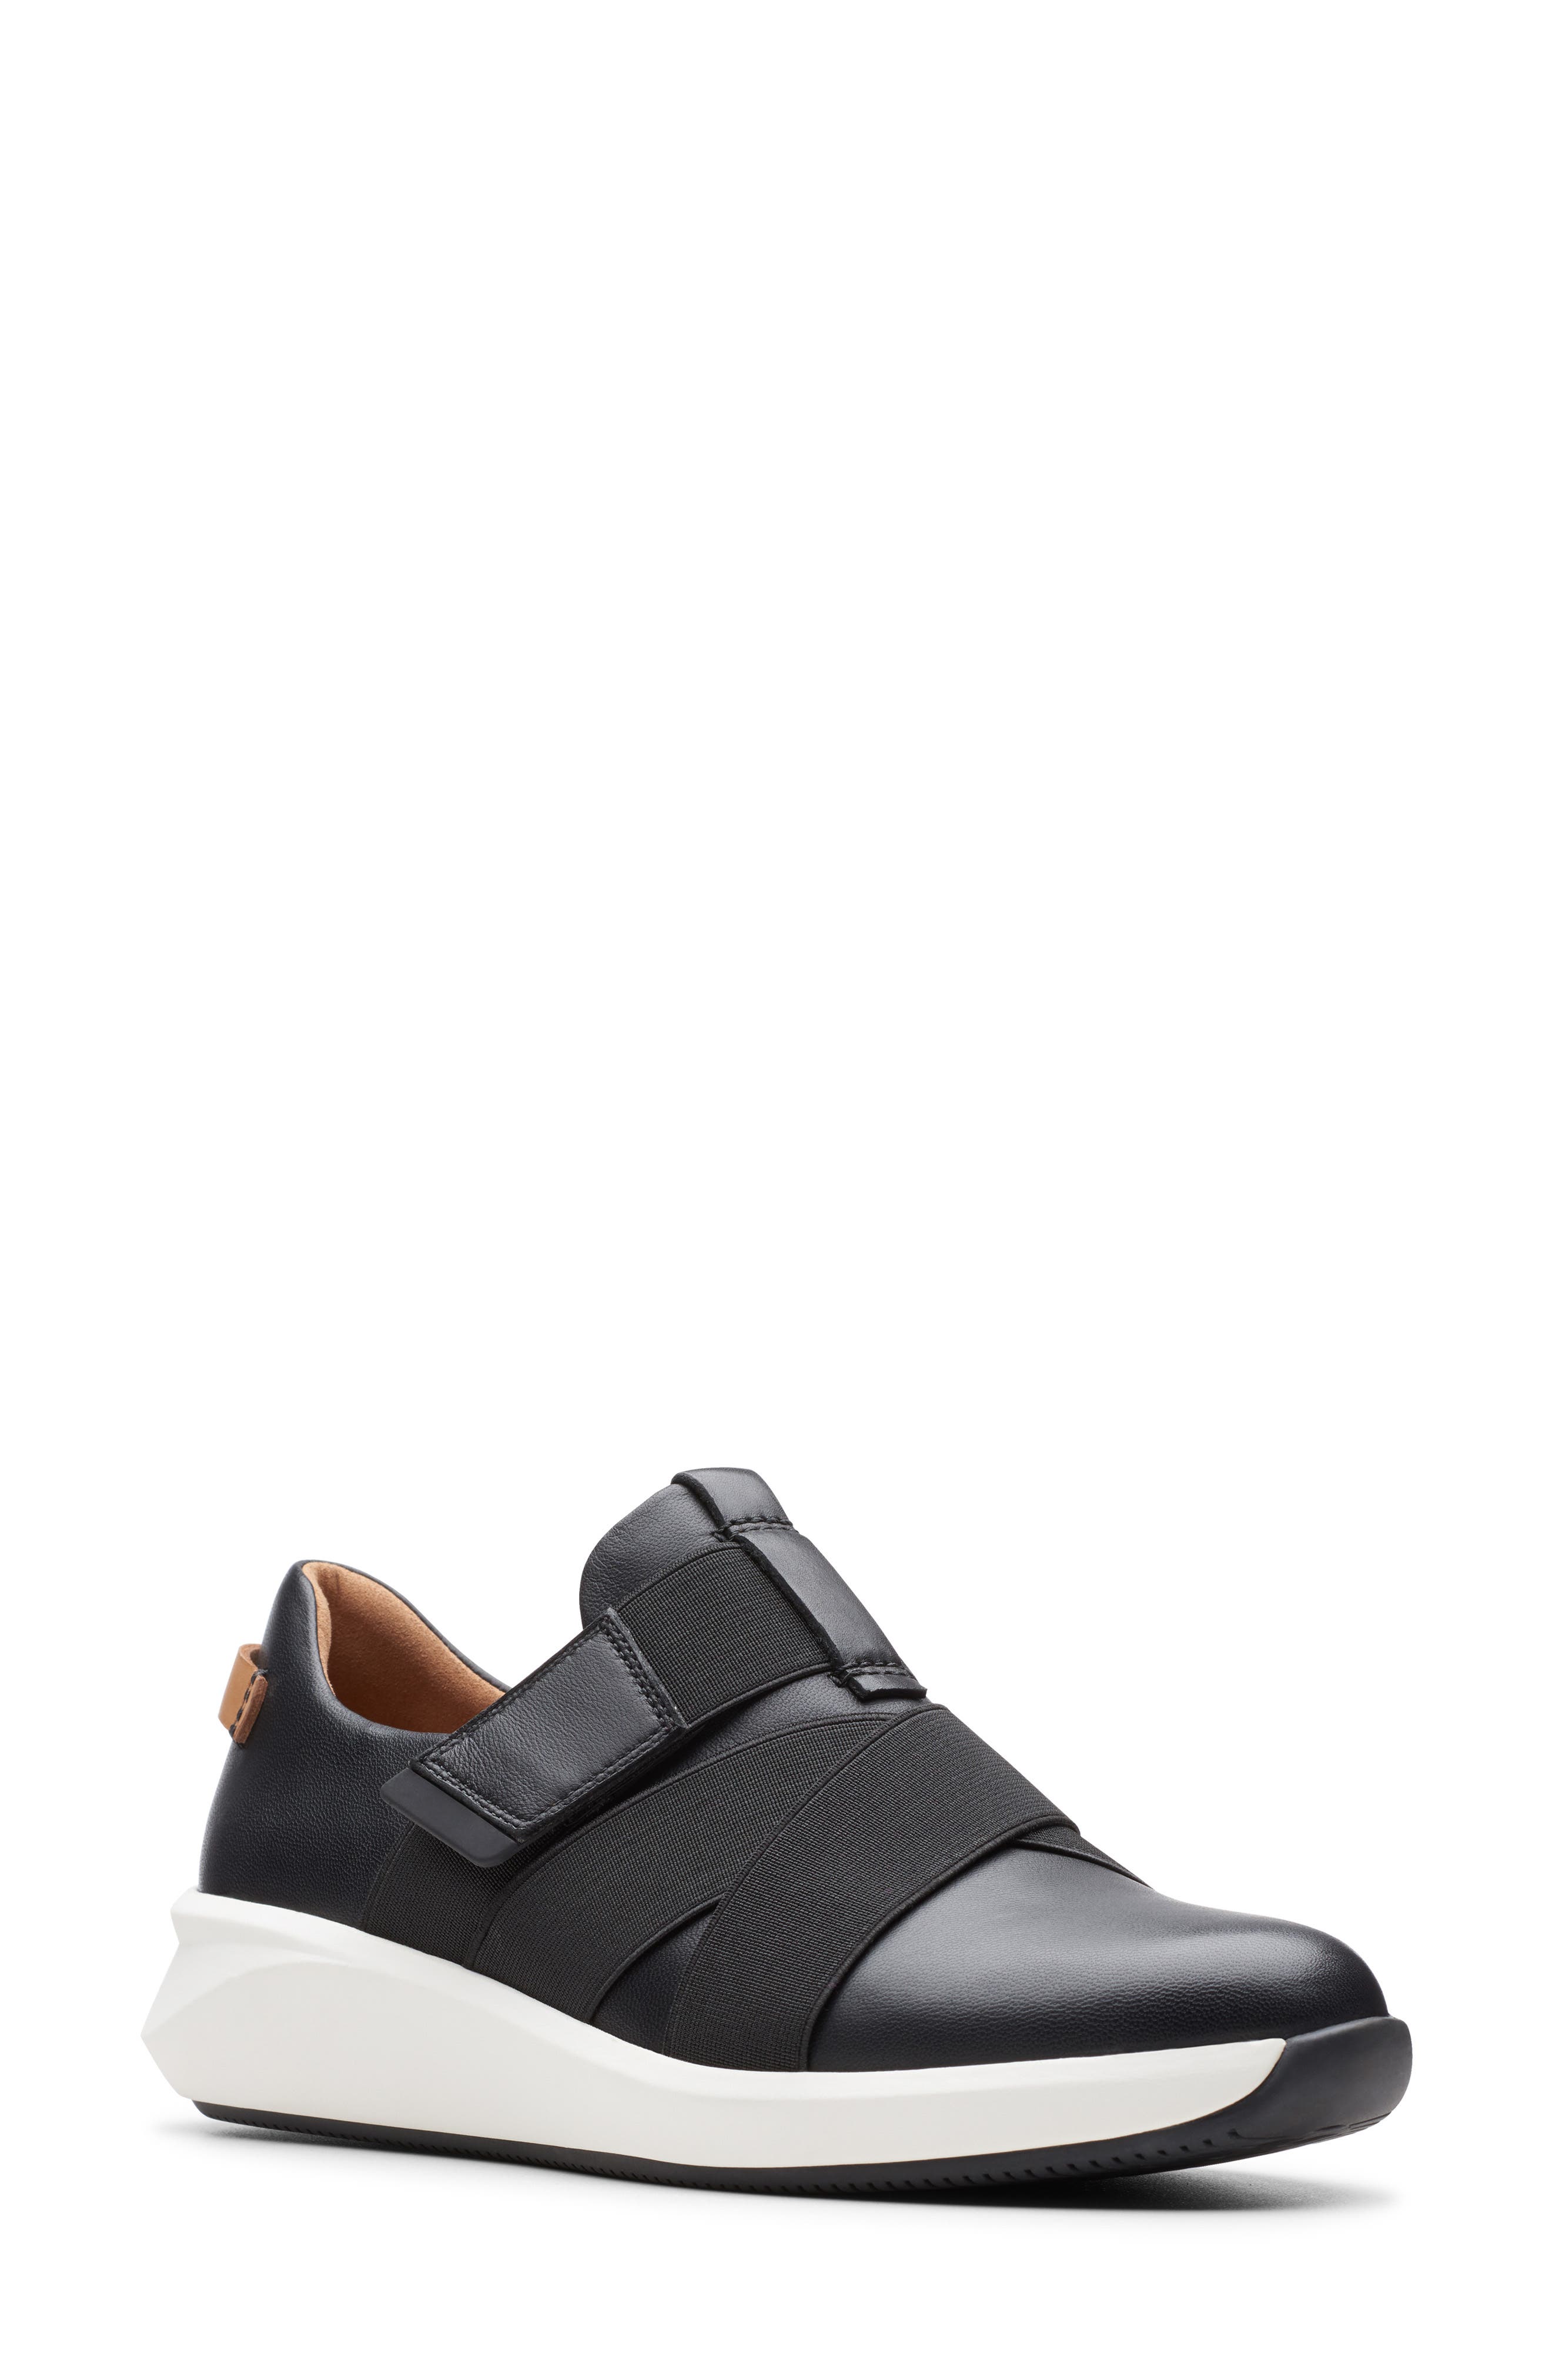 clarks womens leather sneakers